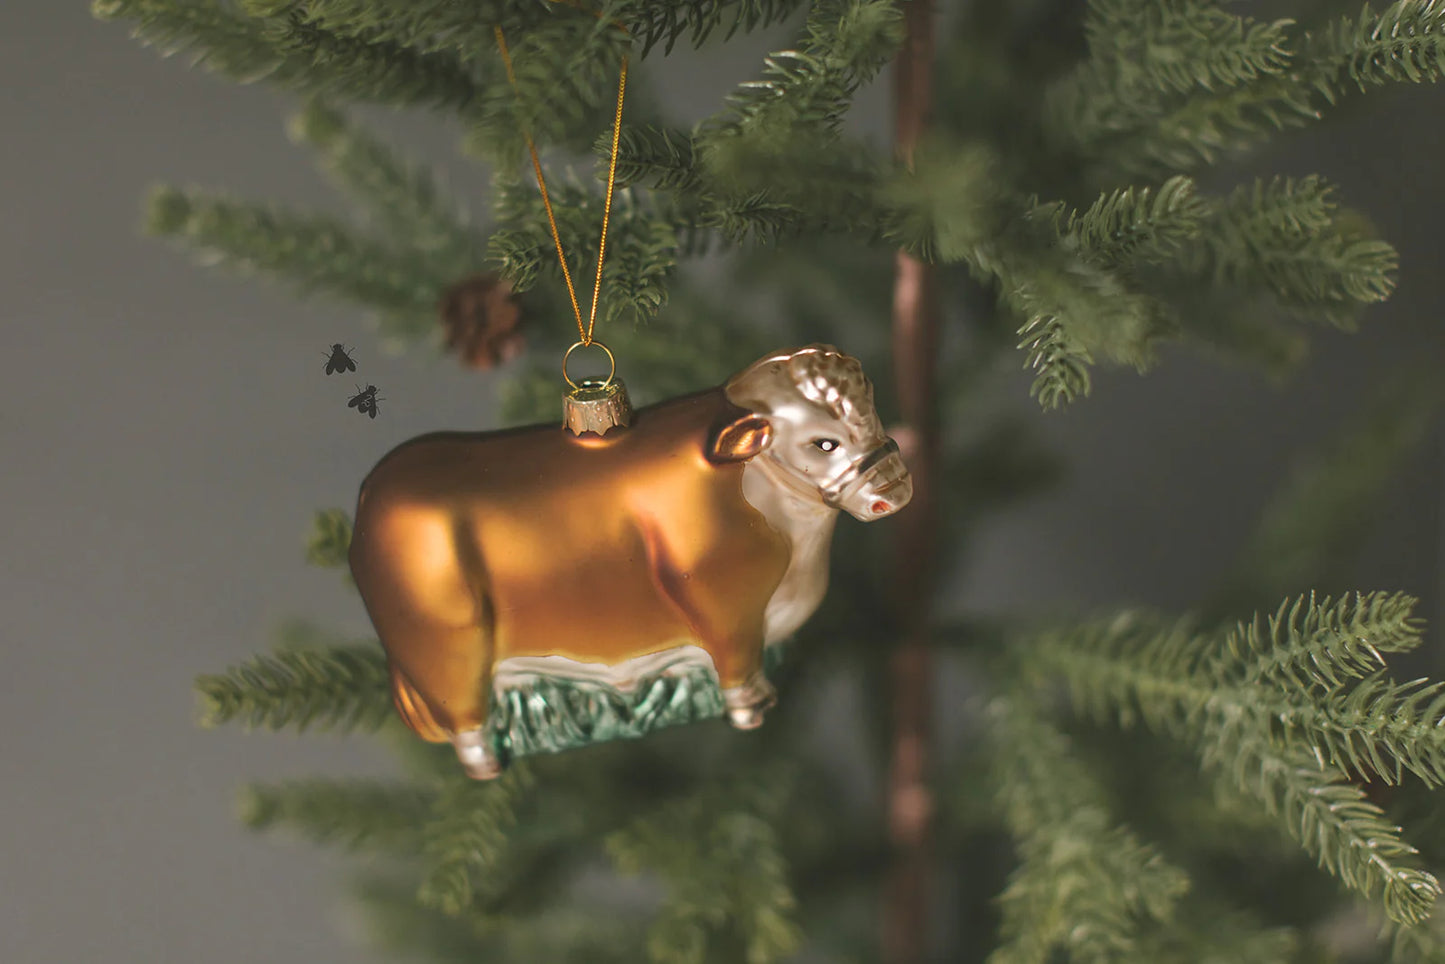 the |HEREFor| the Holidays Ornament